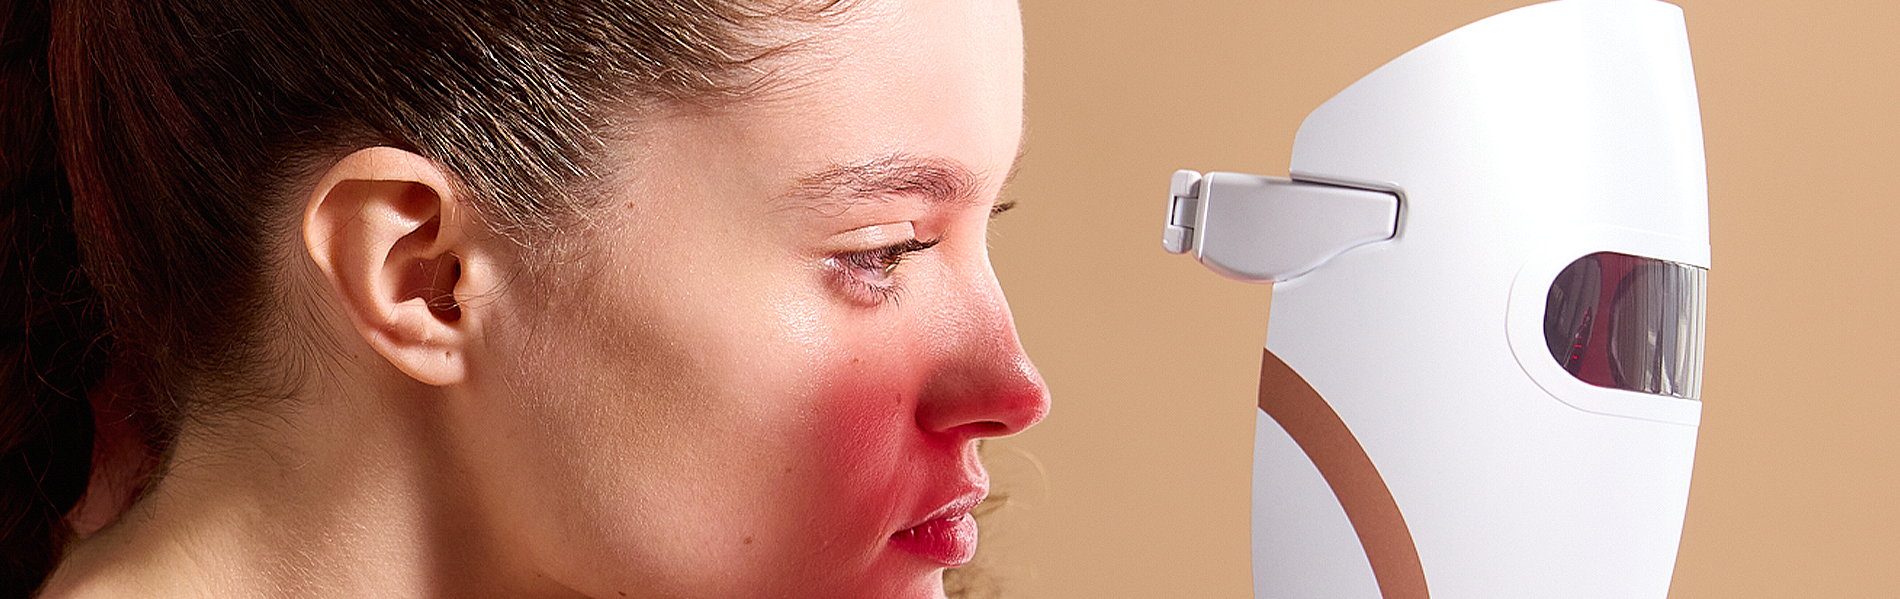 Are Infrared and Red Light Therapy Dangerous for the Eyes?